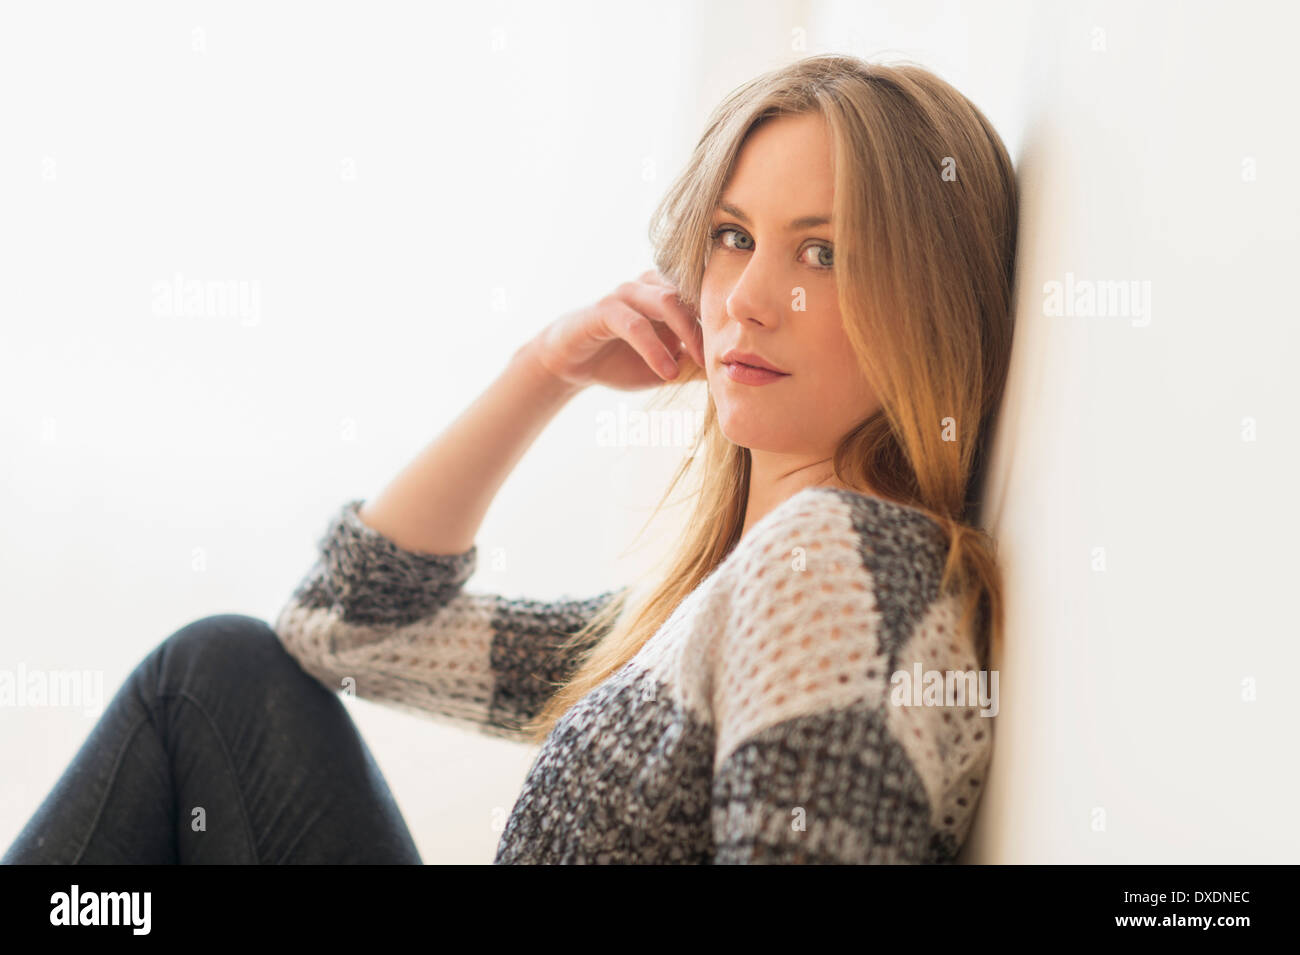 Portrait of attractive young woman sitting by wall Banque D'Images